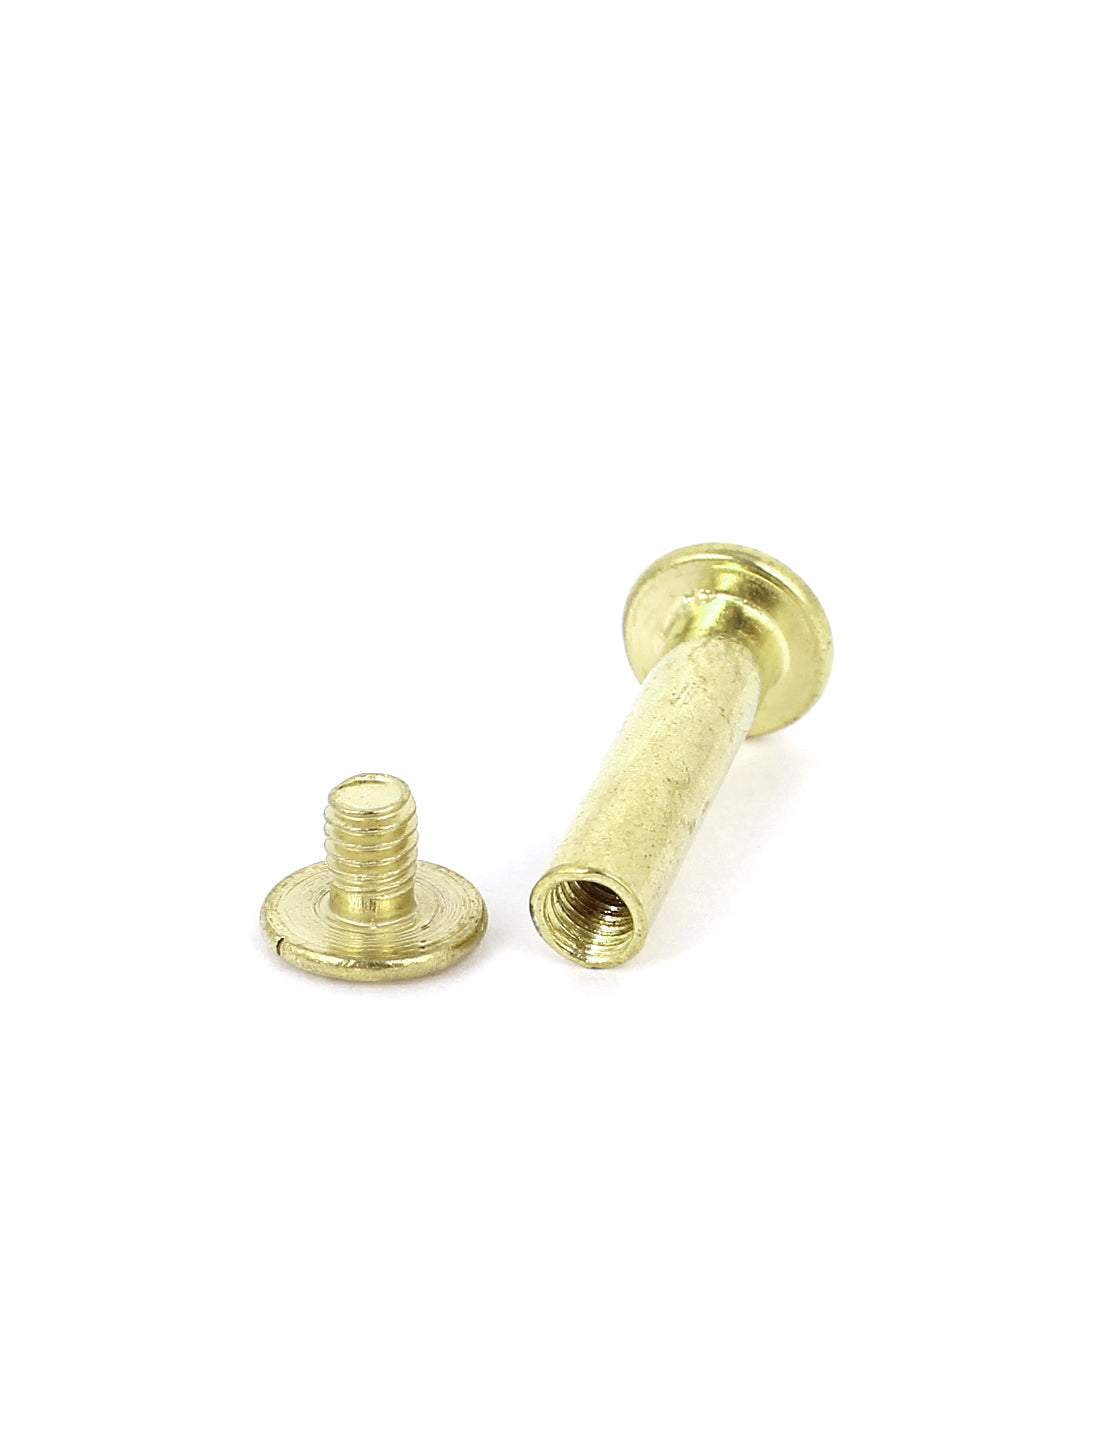 uxcell Uxcell Brass Plated 5x20mm Binding Chicago Screw Post 20pcs for Leather Scrapbook